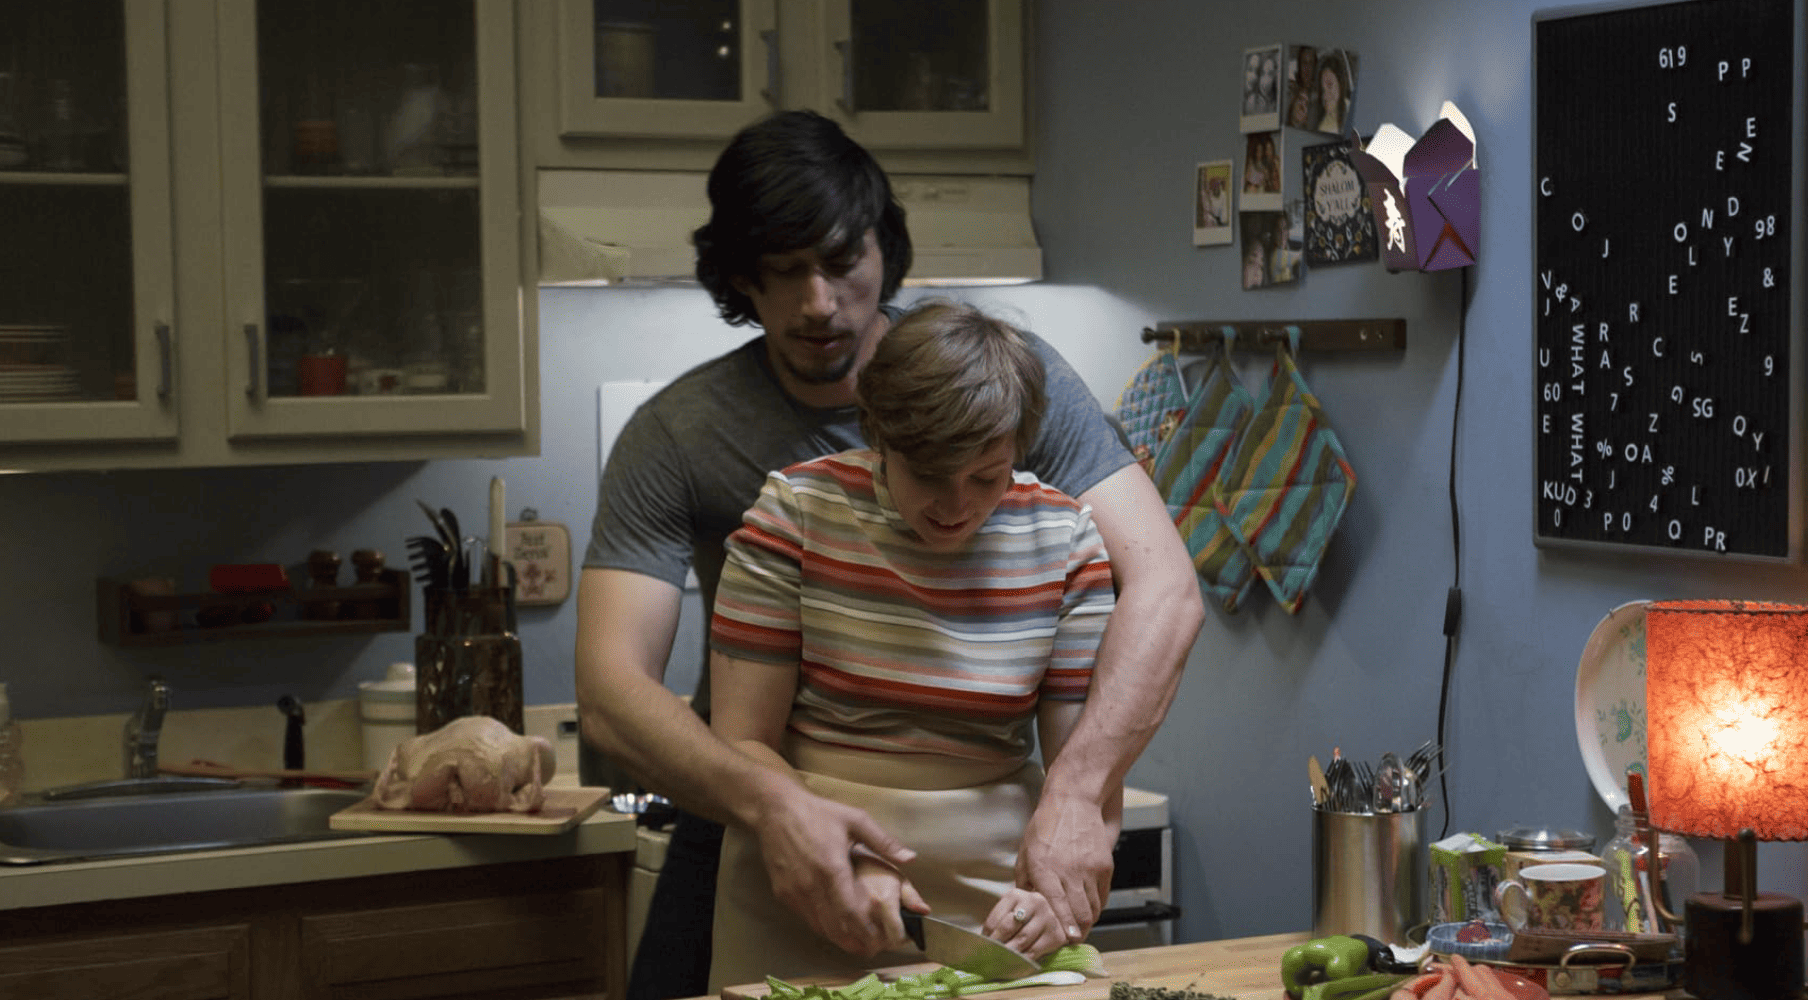 Adam Driver wrapping his arms around Lena Dunham from behind in a kitchen in this image from Apatow Productions